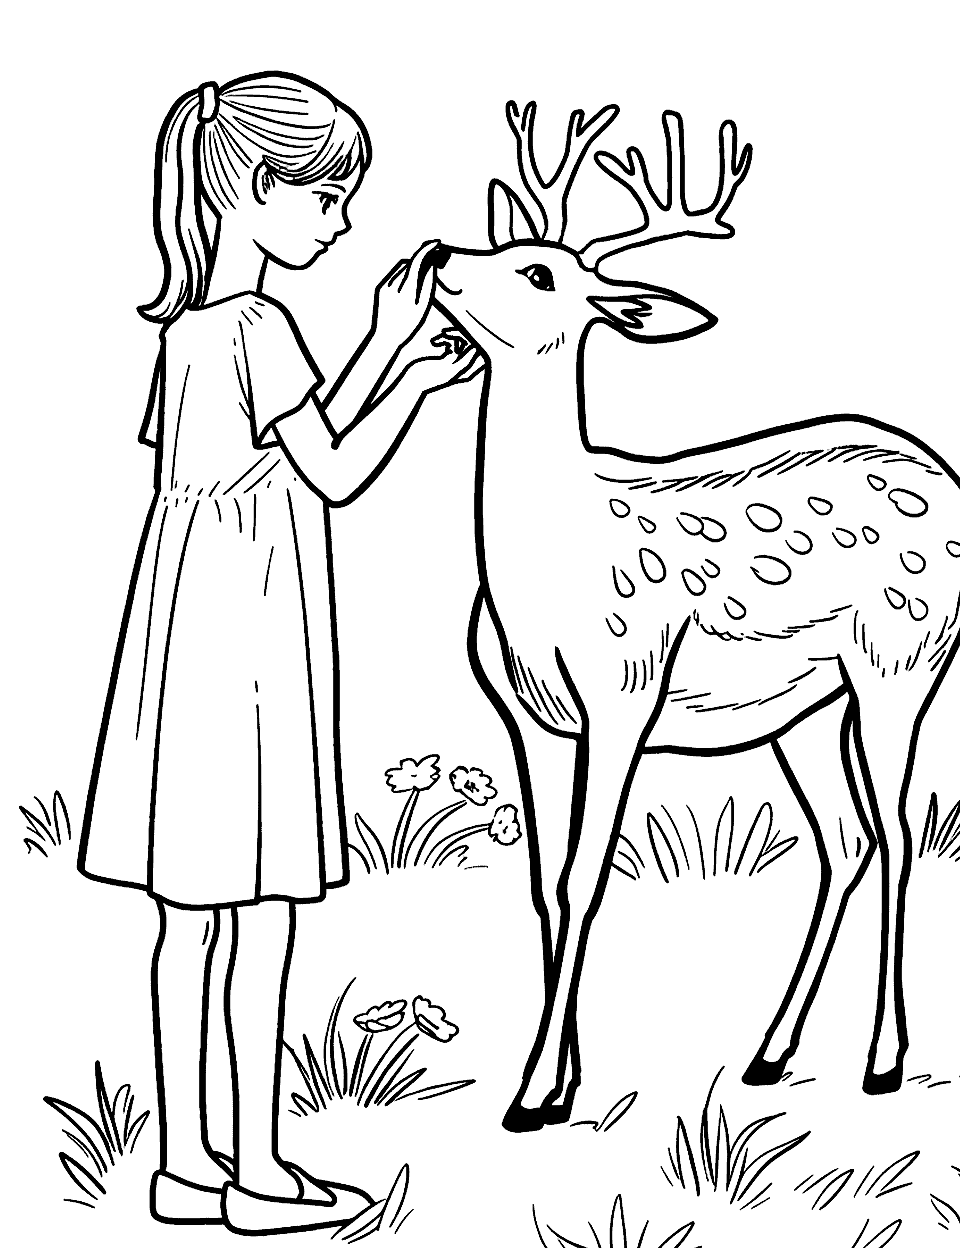 Girl Petting a Deer Coloring Page - A gentle scene of a girl petting a friendly deer.